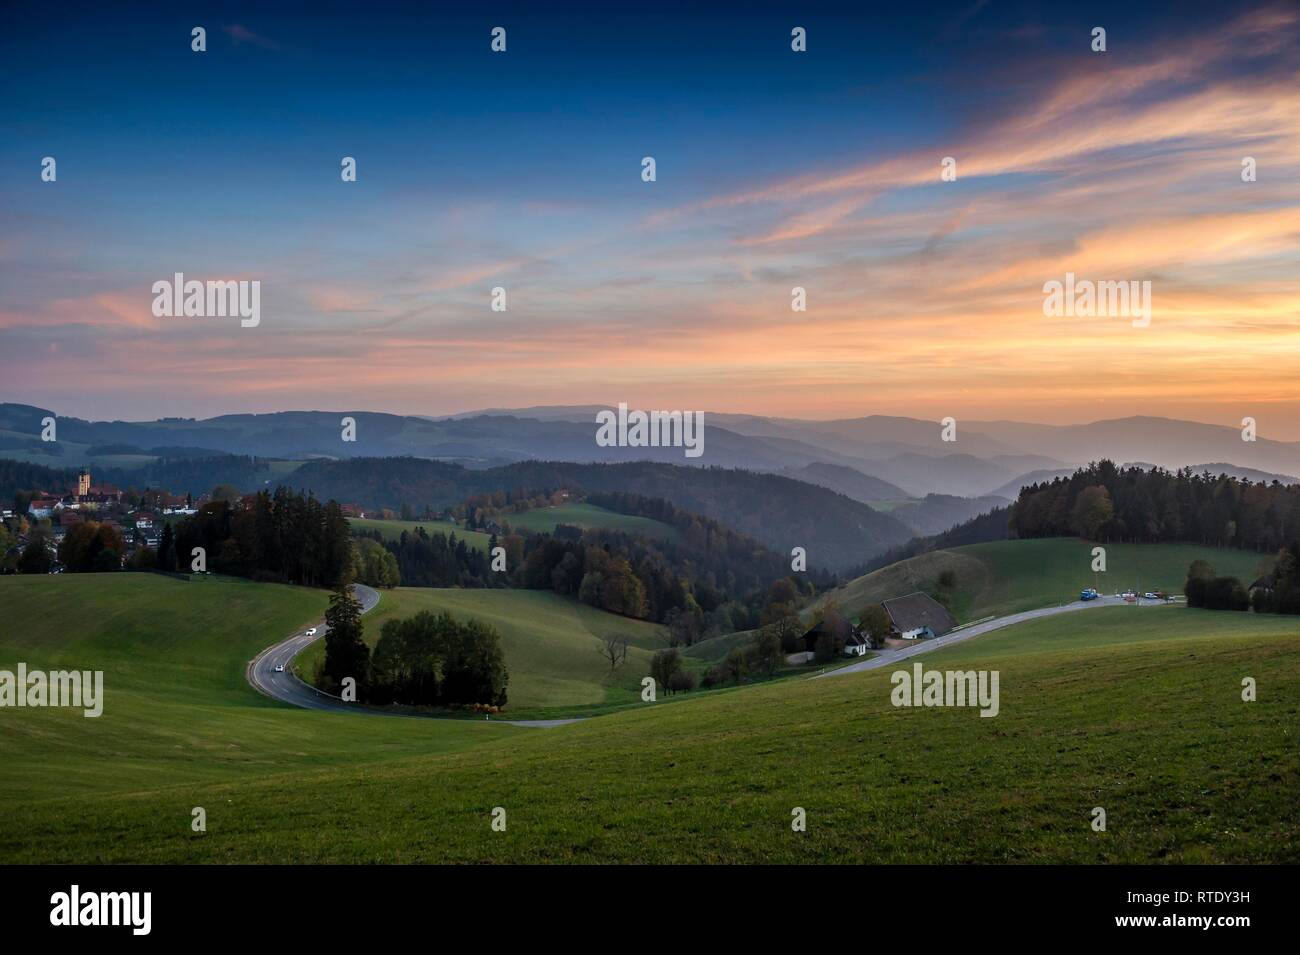 View of hilly landscape in autumn, evening light, near St Märgen, Black Forest, Baden-Württemberg, Germany Stock Photo